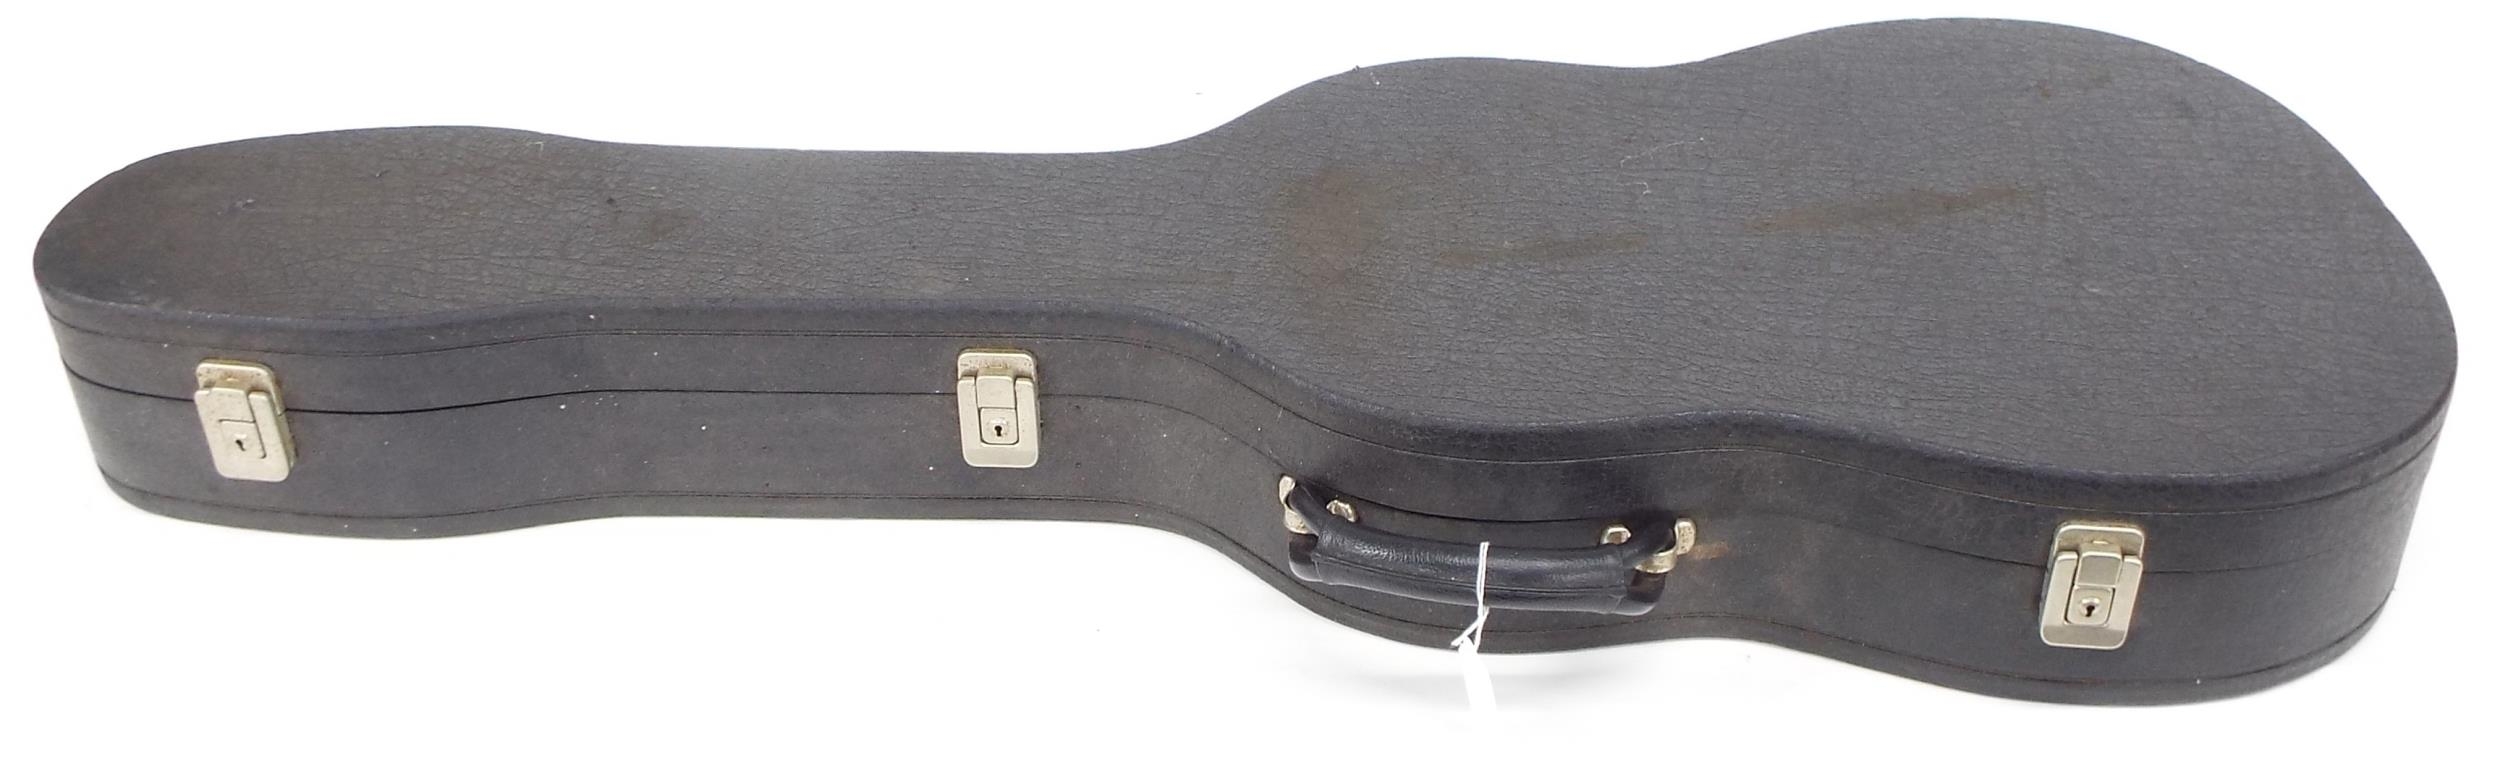 Thinline electric guitar hard case suitable for a 15" lower bout and 11" upper bout guitar - Image 2 of 2